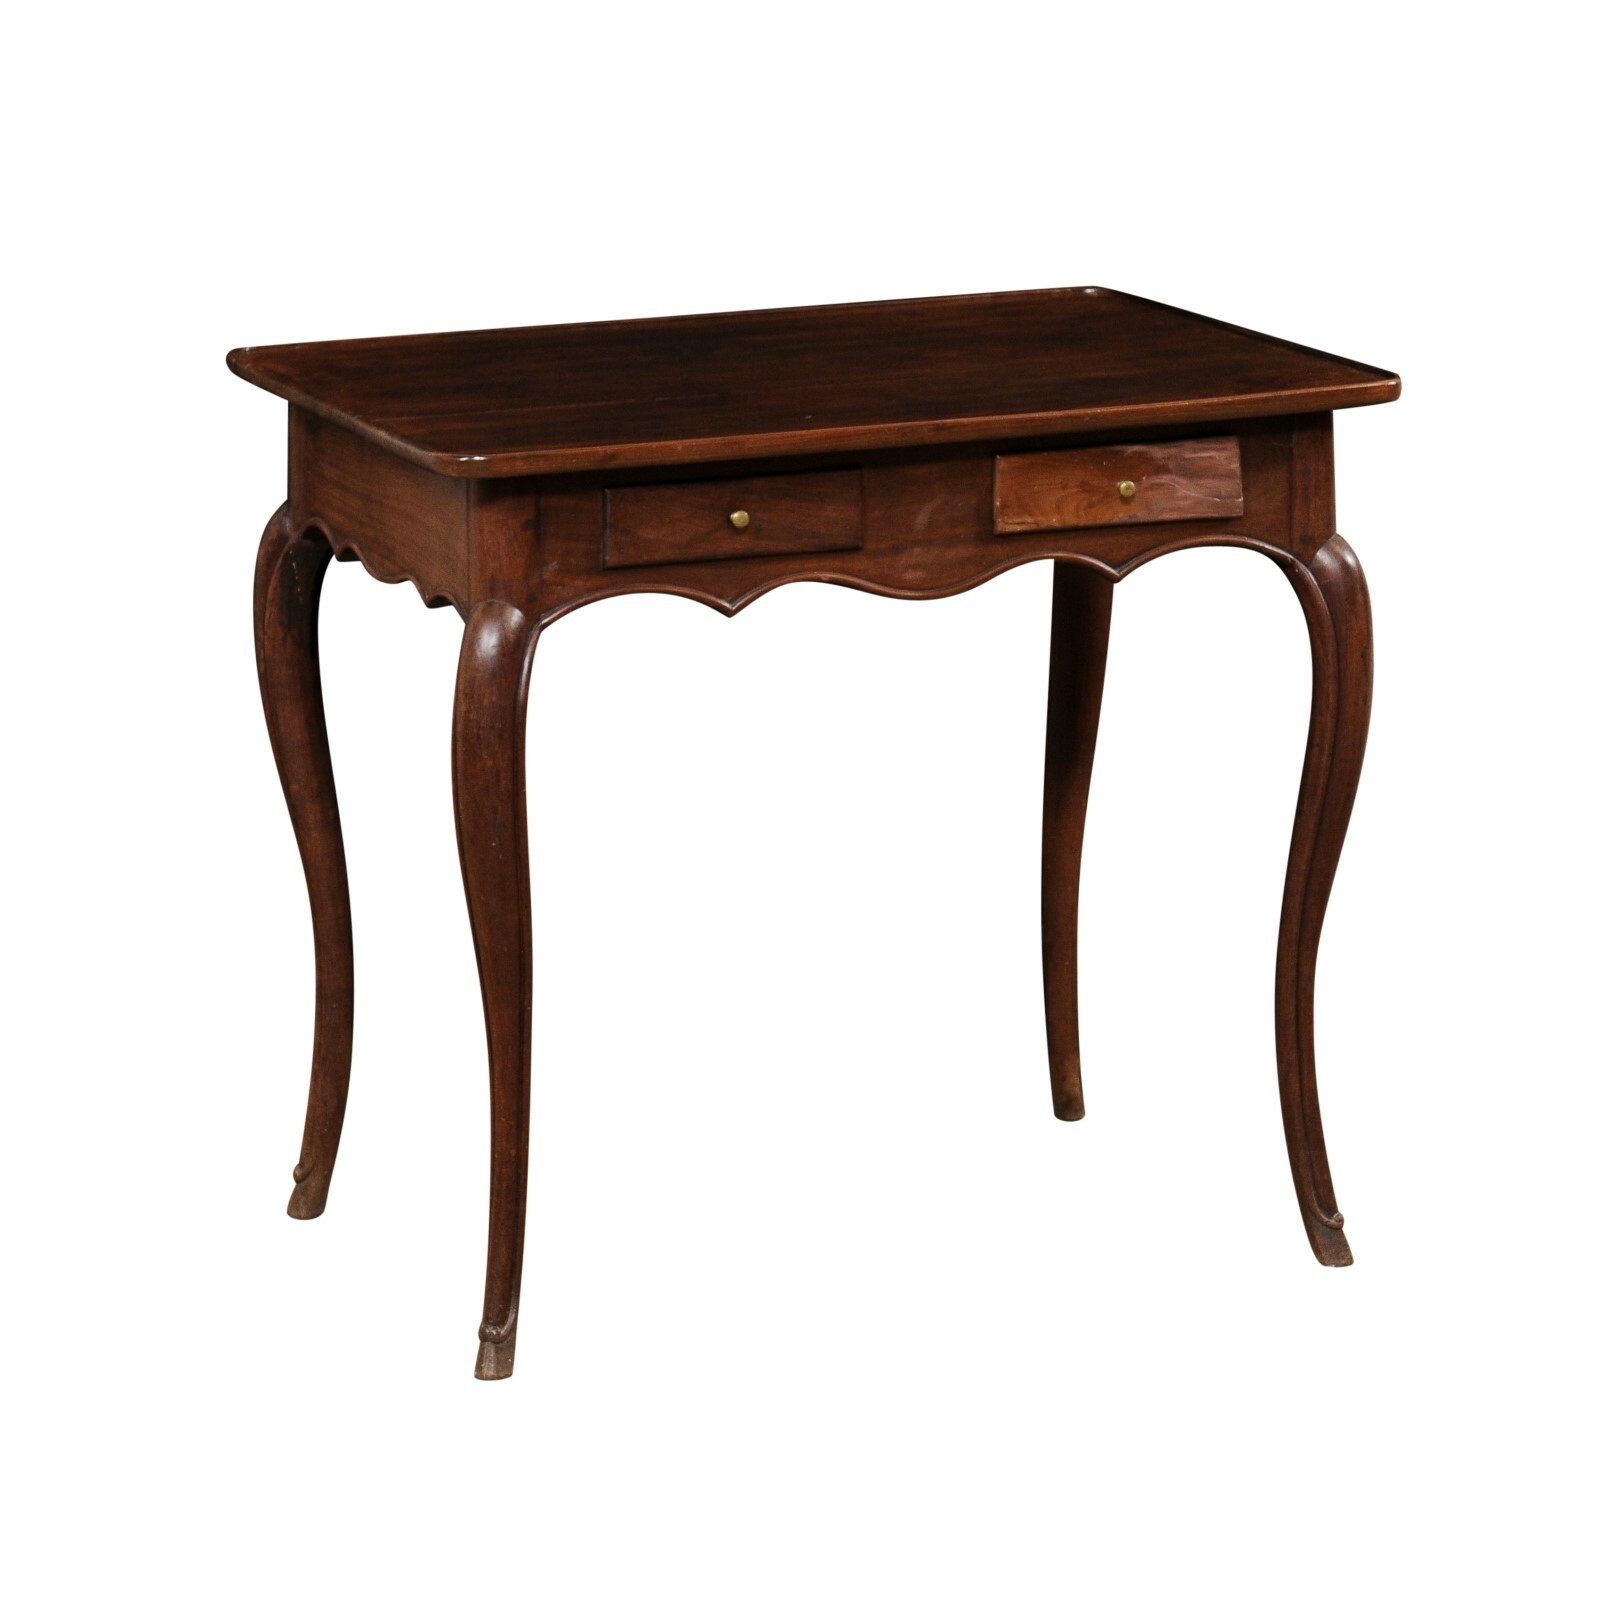 French 18th C. Carved-Wood Occasional Table